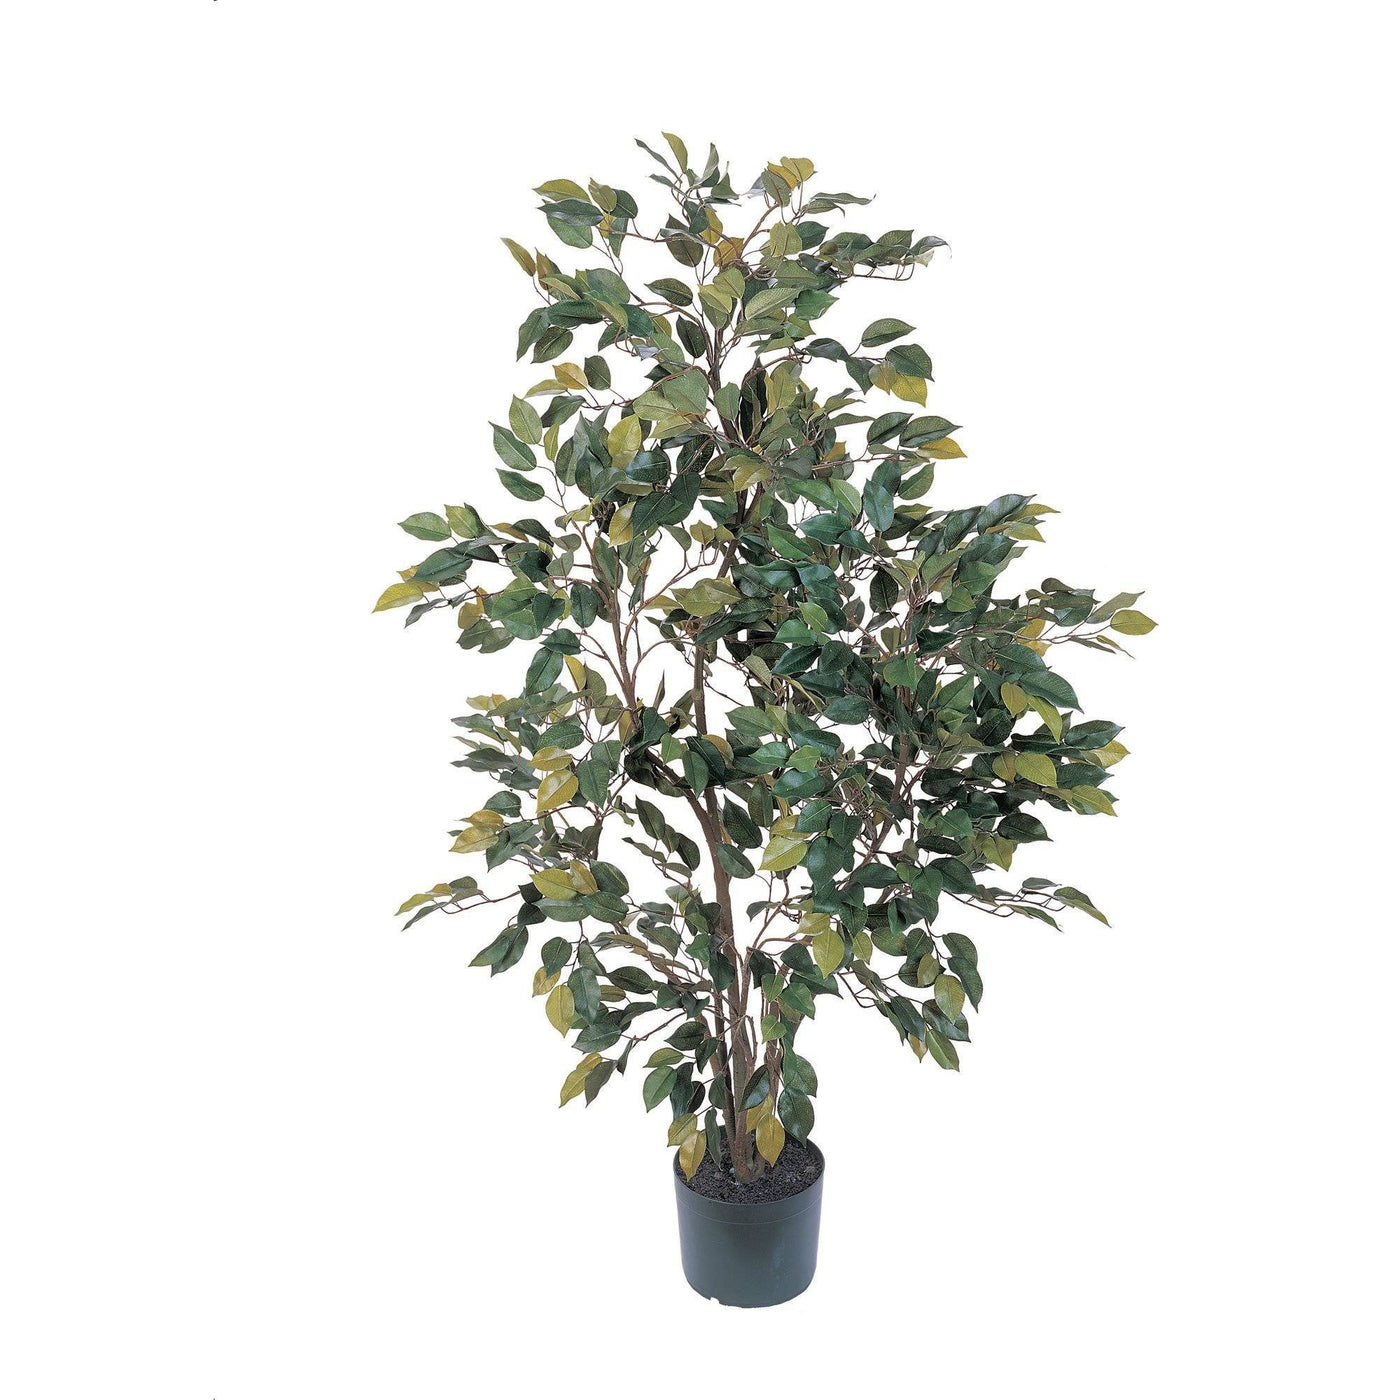 5 ft Realistic Artificial Ficus Tree in Pot, Natural Trunk, Lush Leaves,  Lifelike Faux Tree